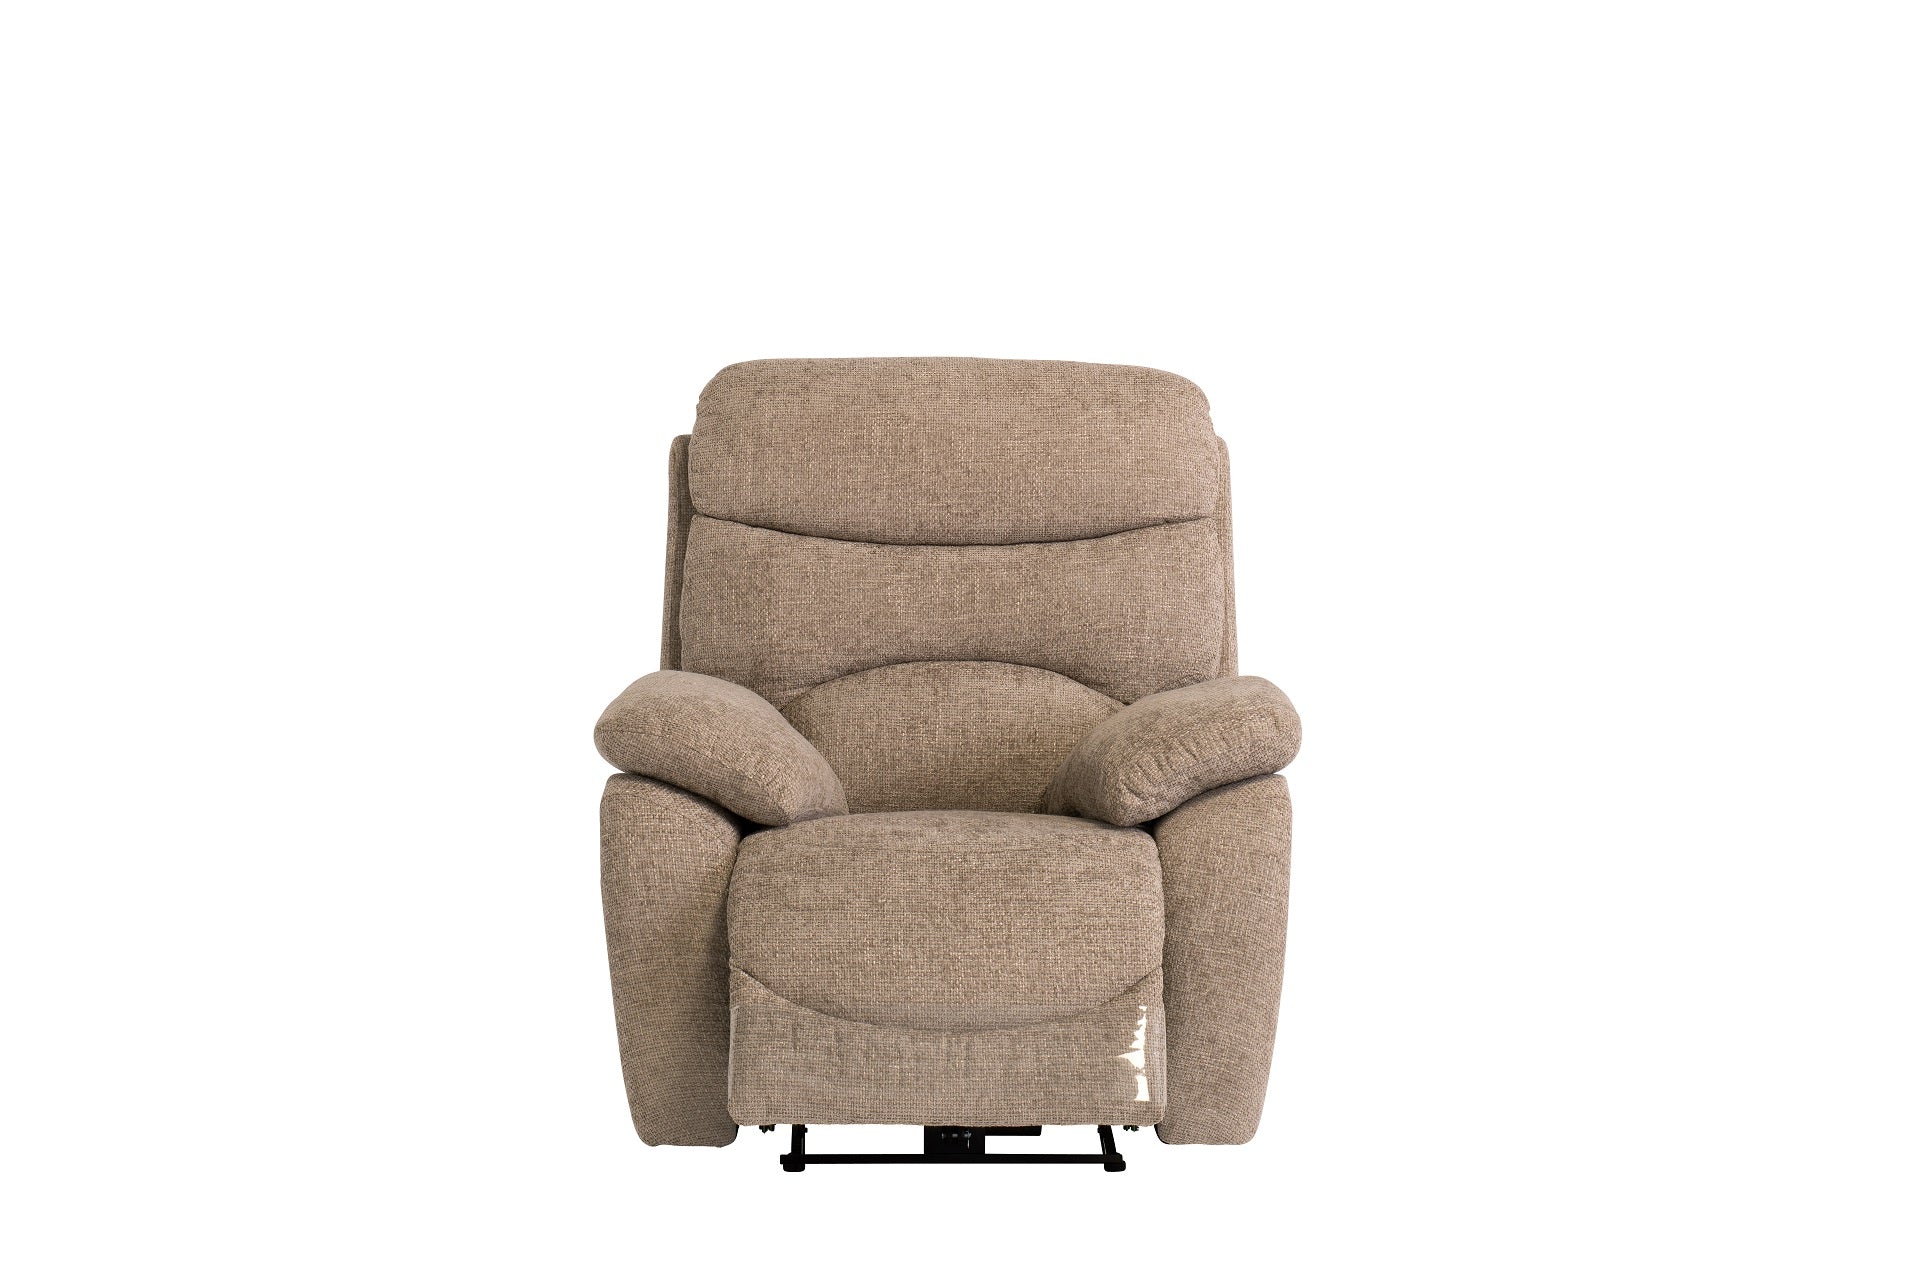 Lola Electric Recliner Armchair - Sand